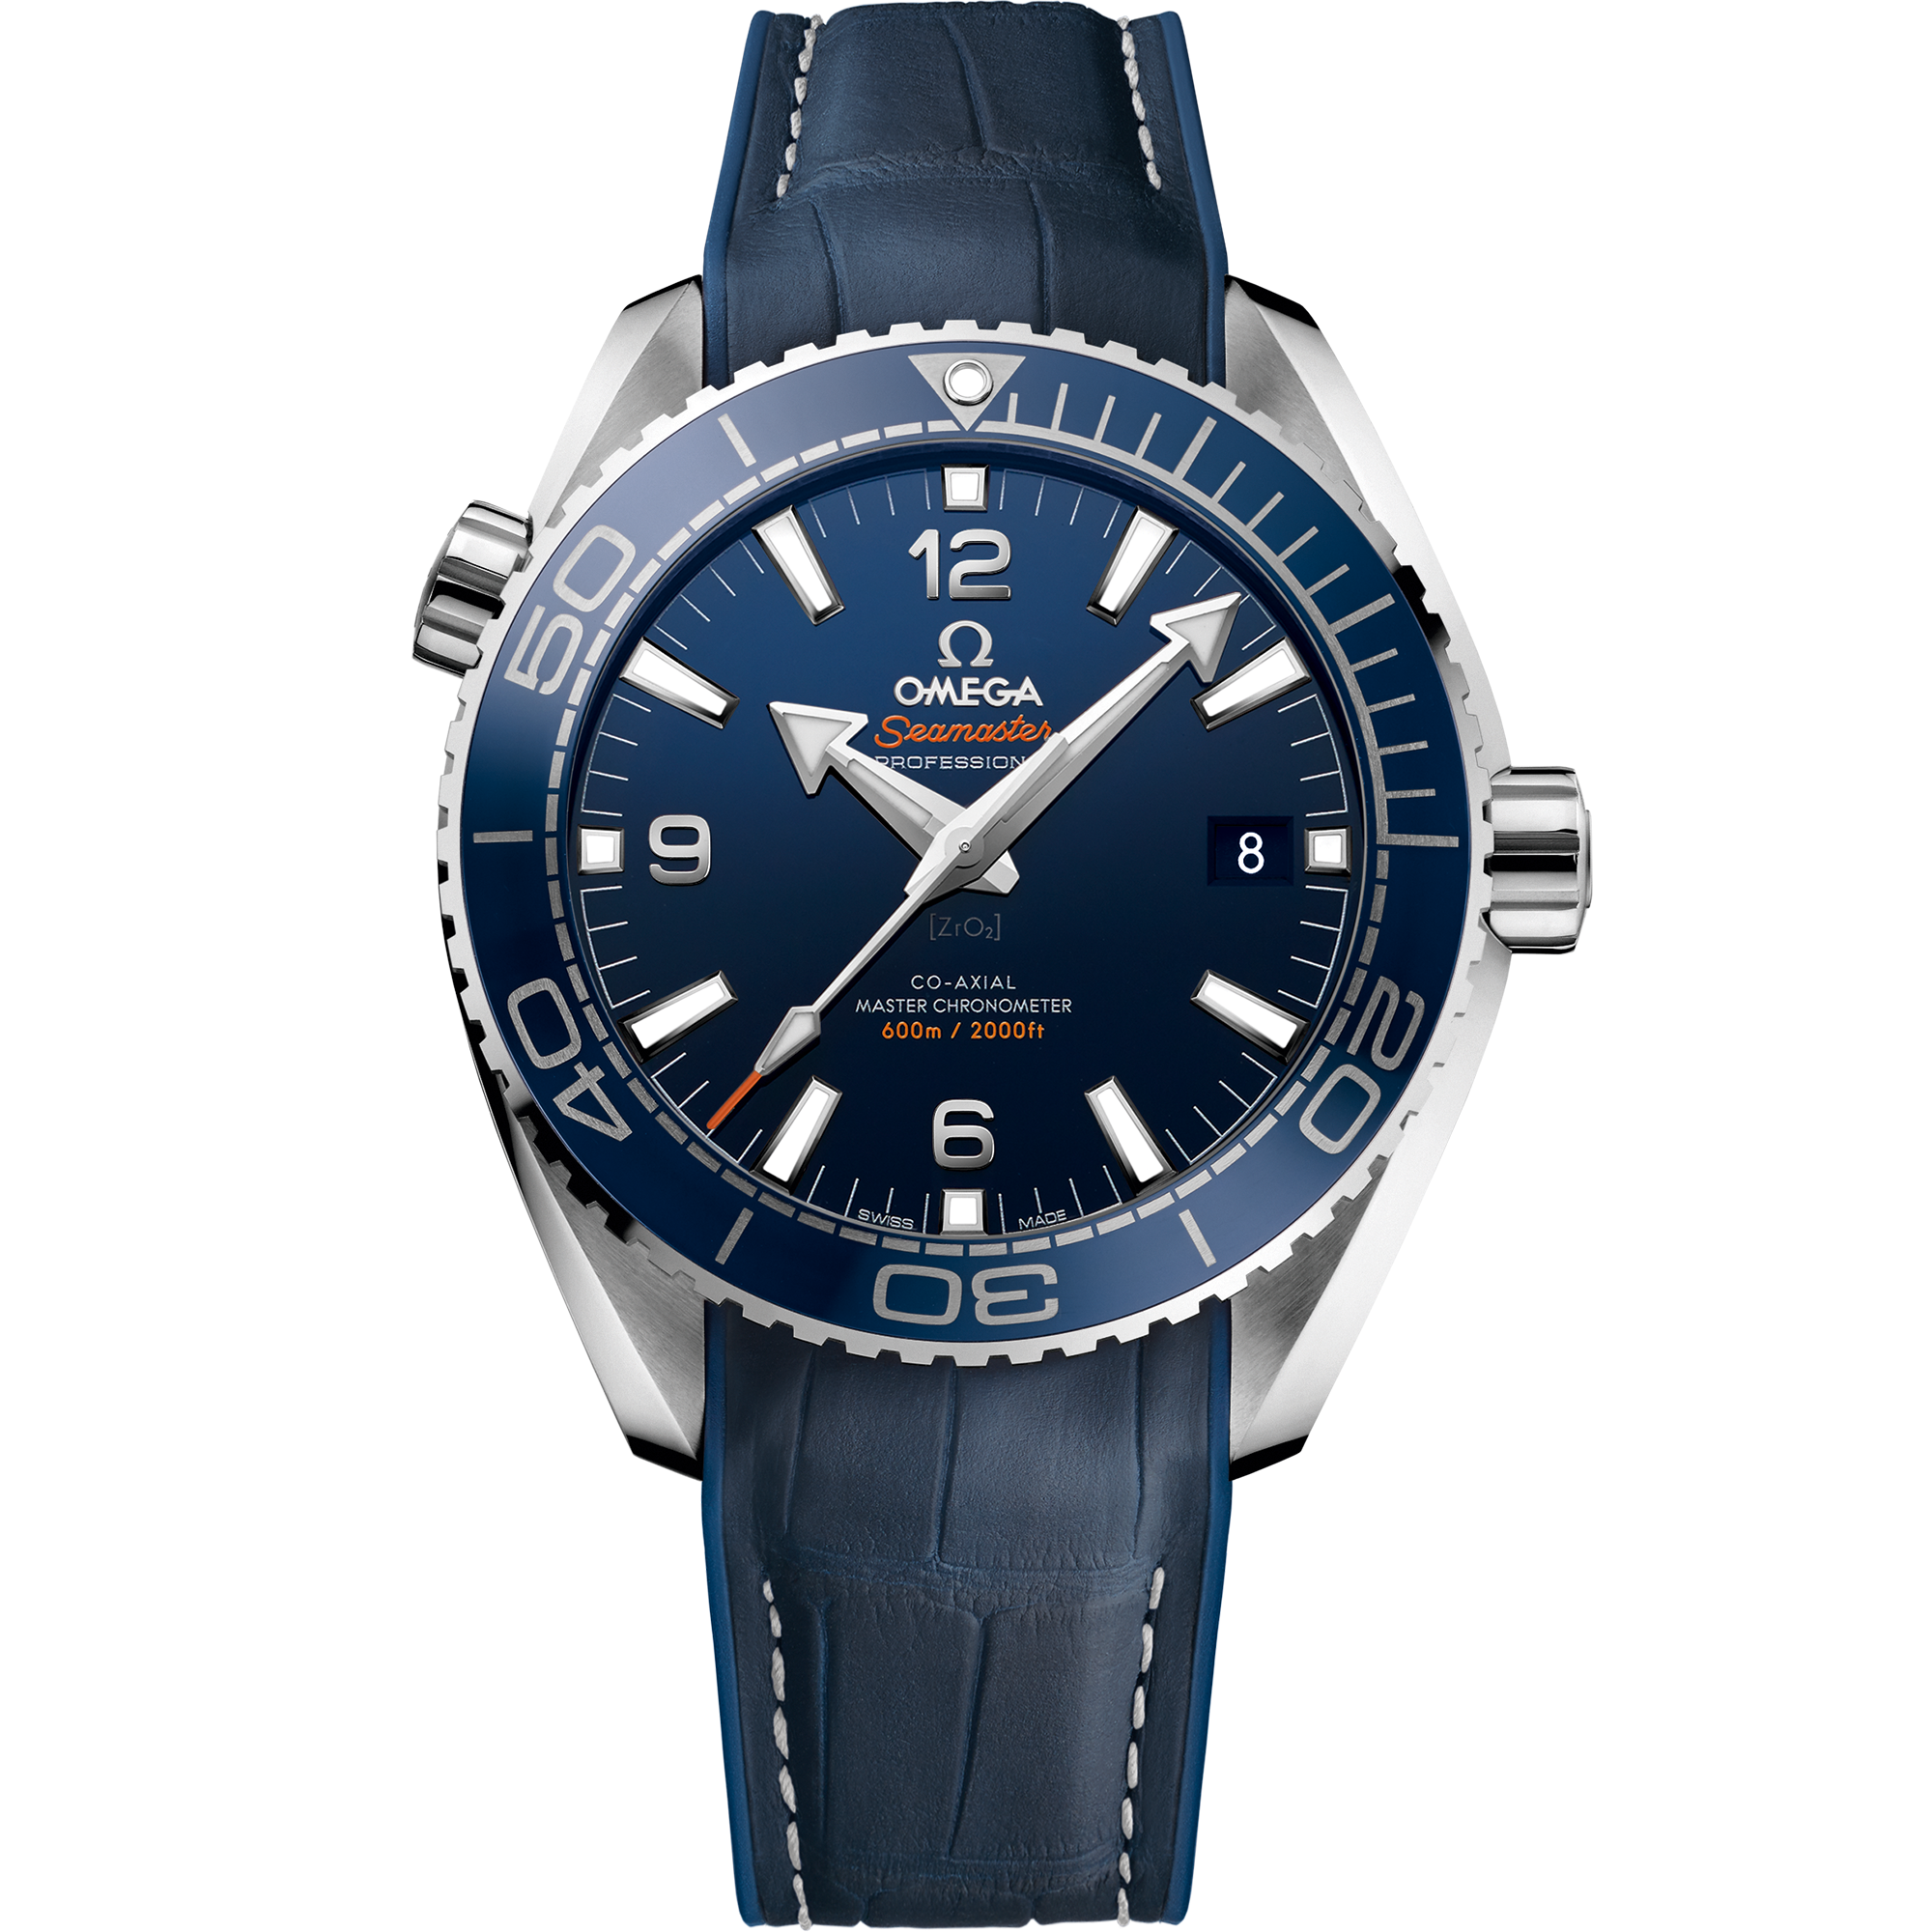 Seamaster 43.5 mm, steel on leather strap with rubber lining - 215.33.44.21.03.001